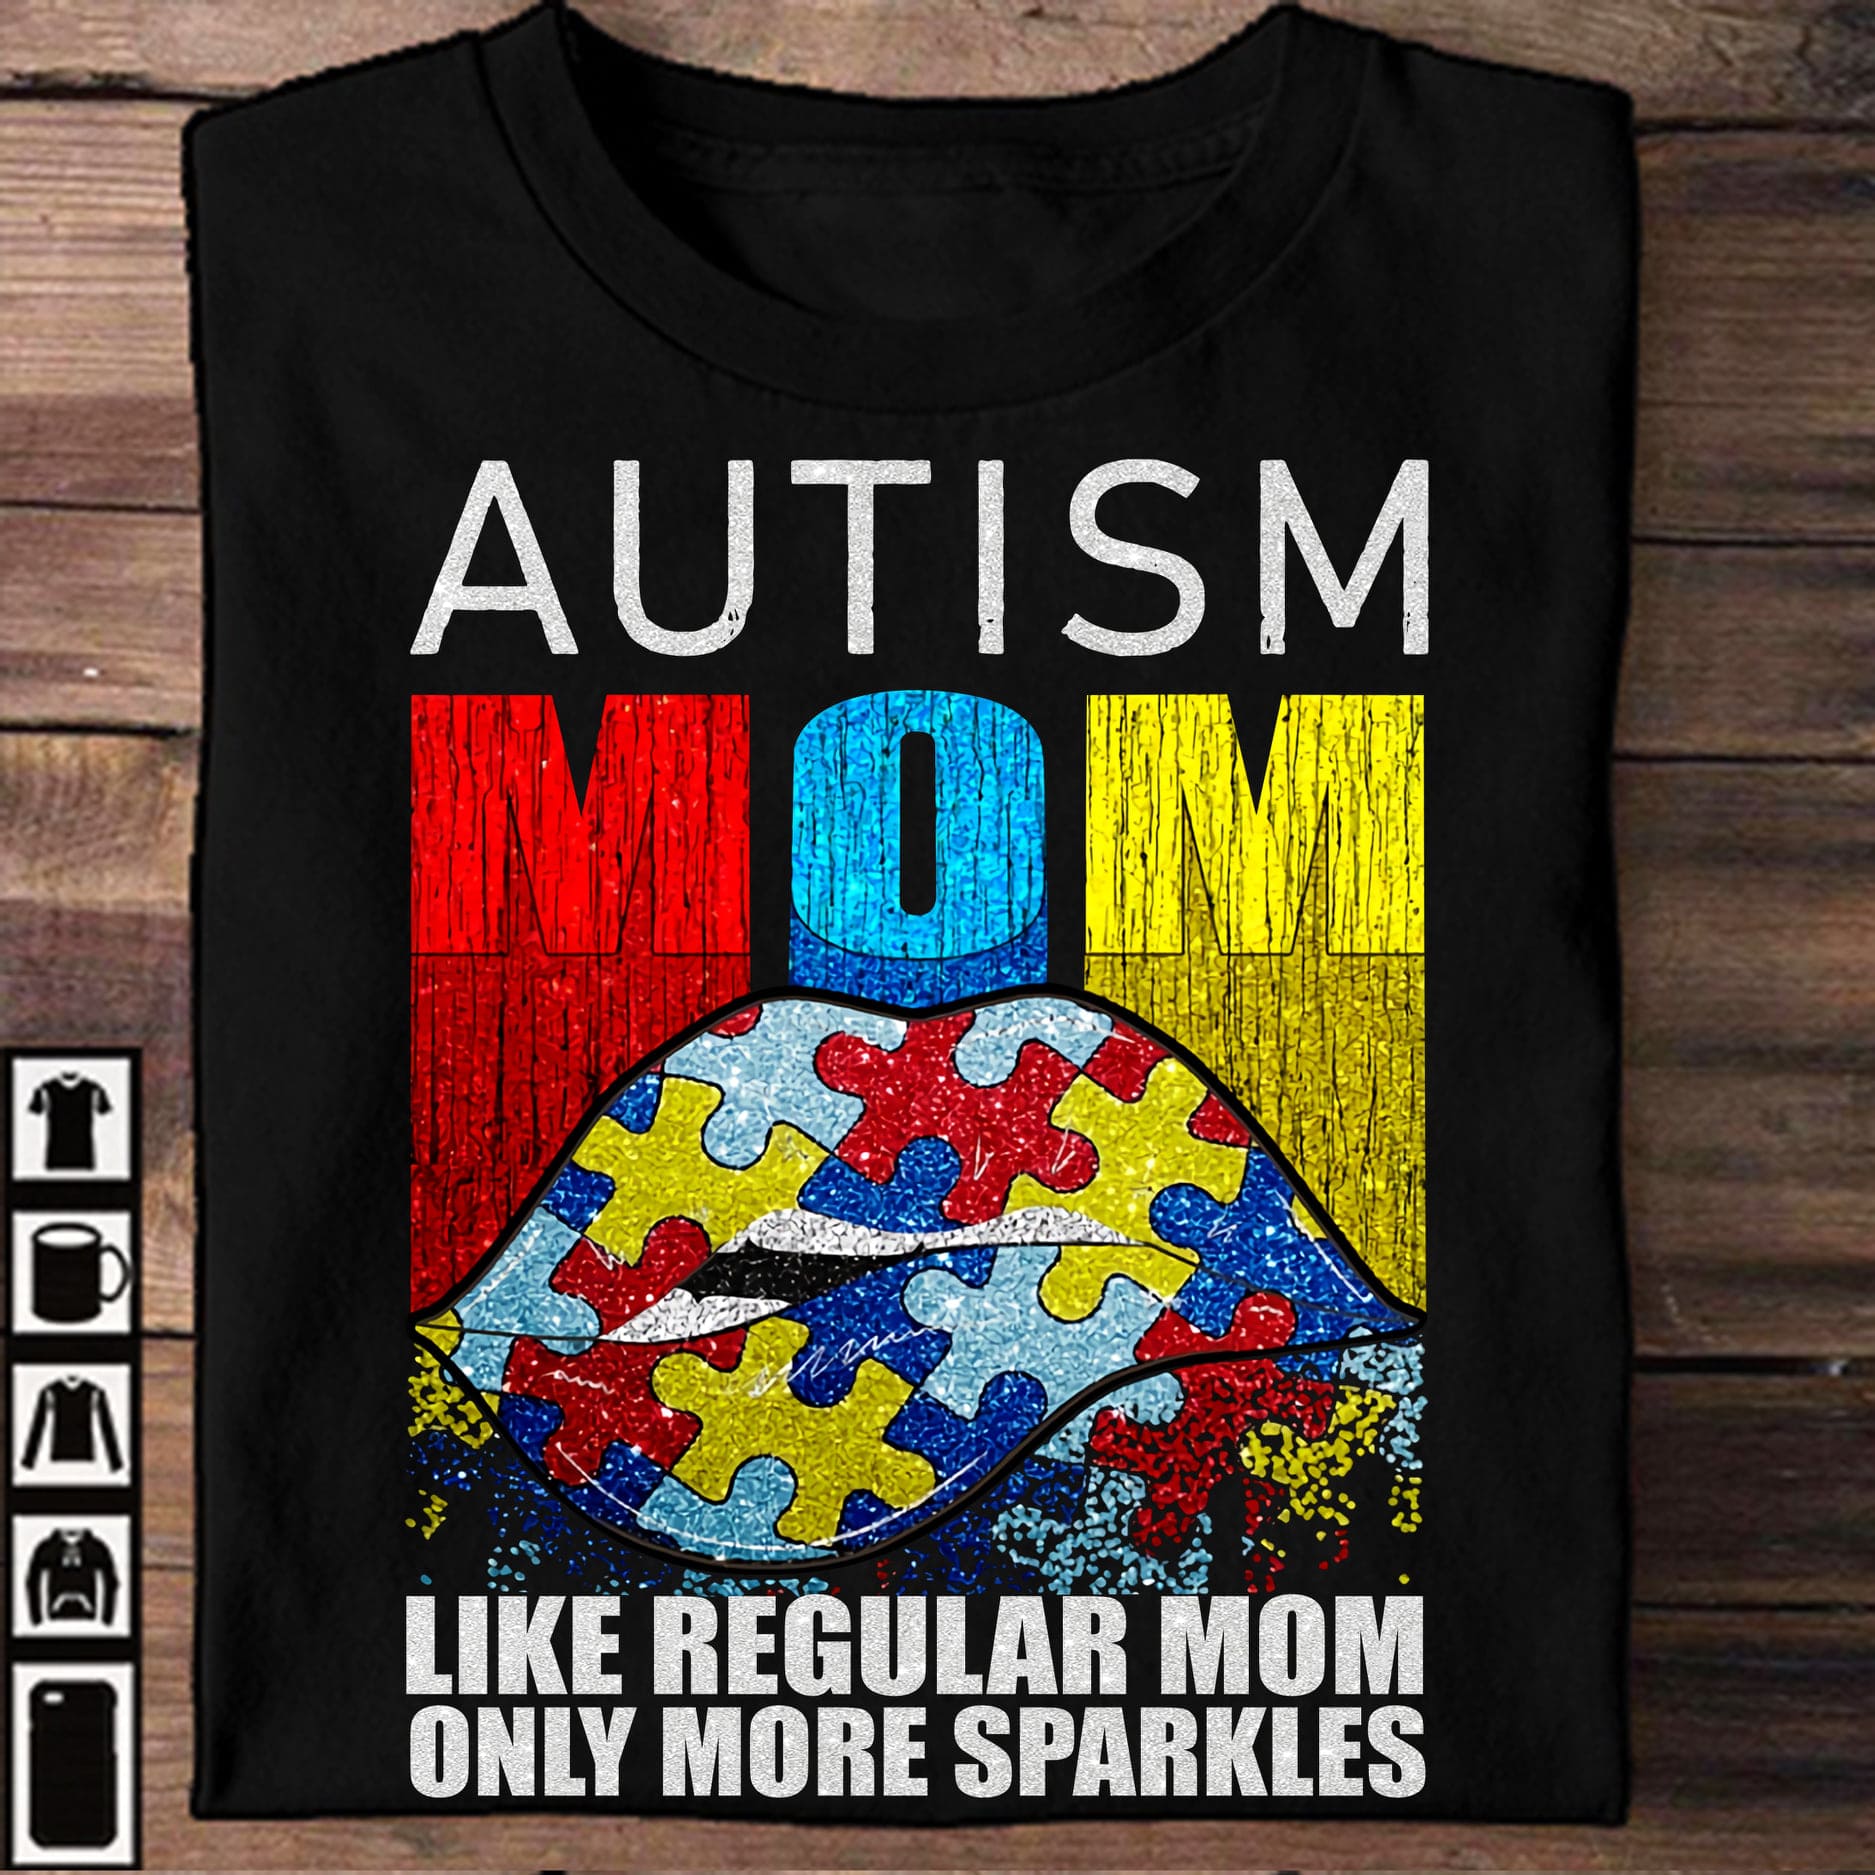 Autism Lips Woman - Autism Mom like regular mom only more sparkles